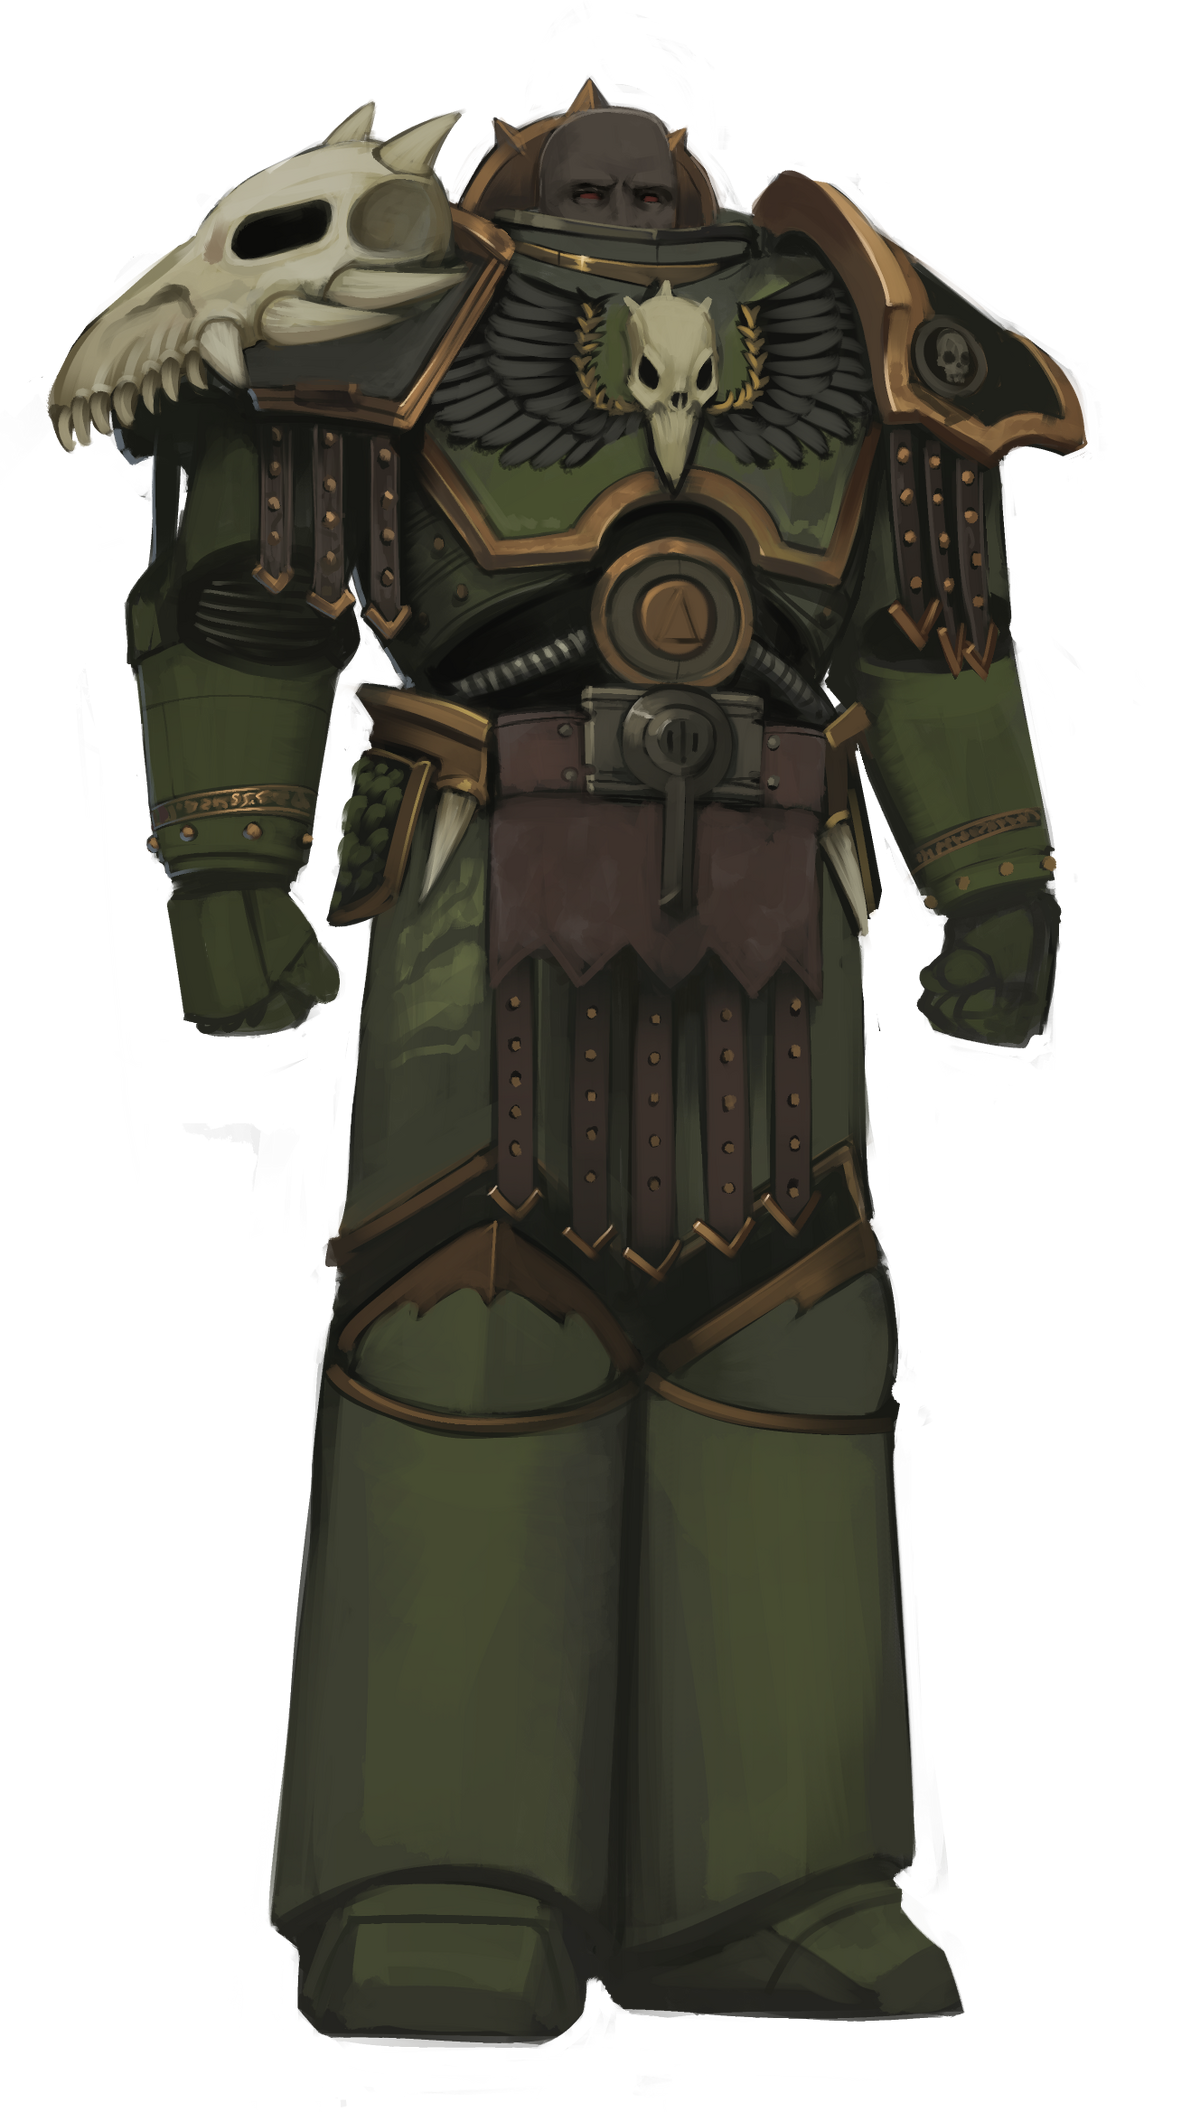 The Salamanders are the Sons of Vulkan - Warhammer 40,000